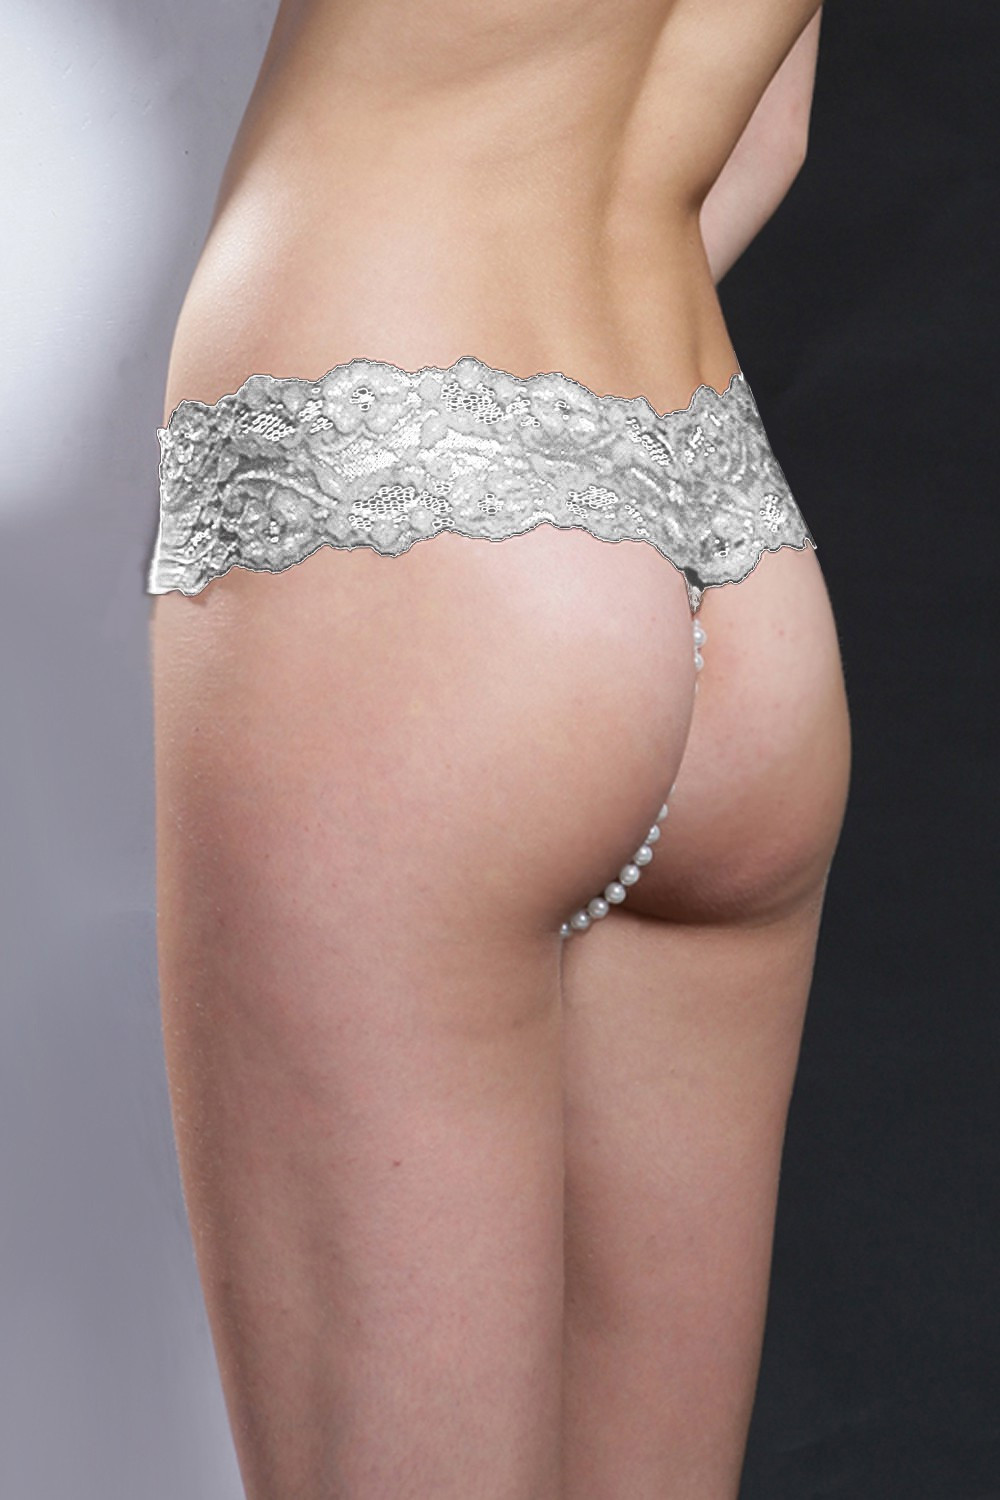 Jewelery thong with white pearls